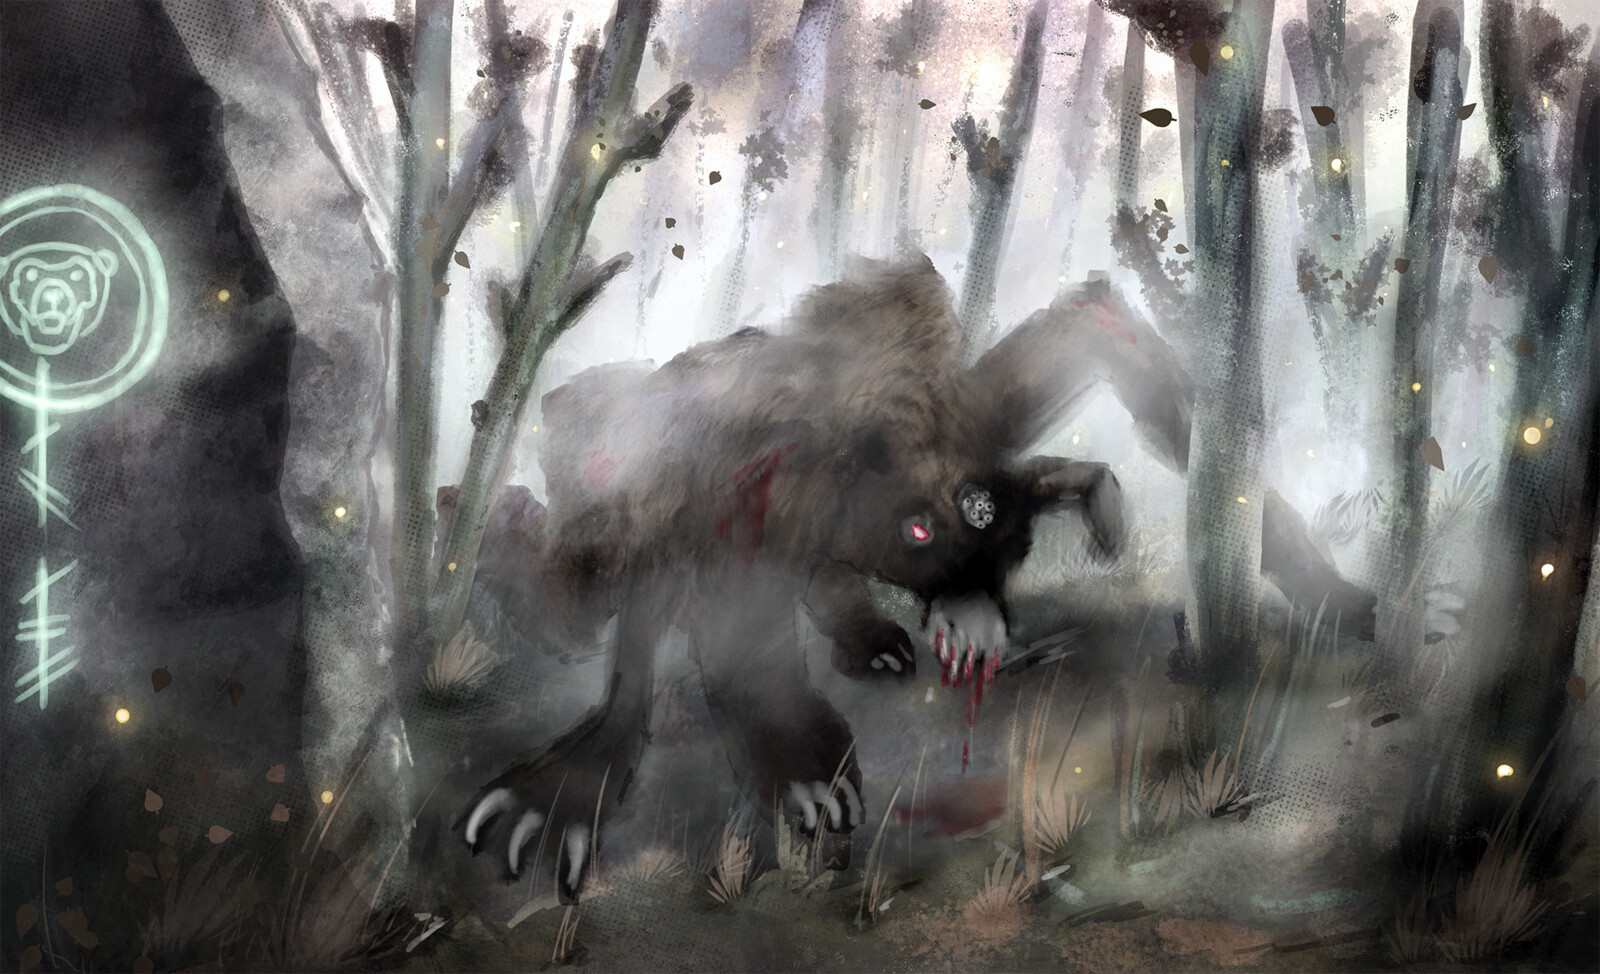 Mood illustration for an unpublished project. A bear monster in the misty woods of a Celtic island.